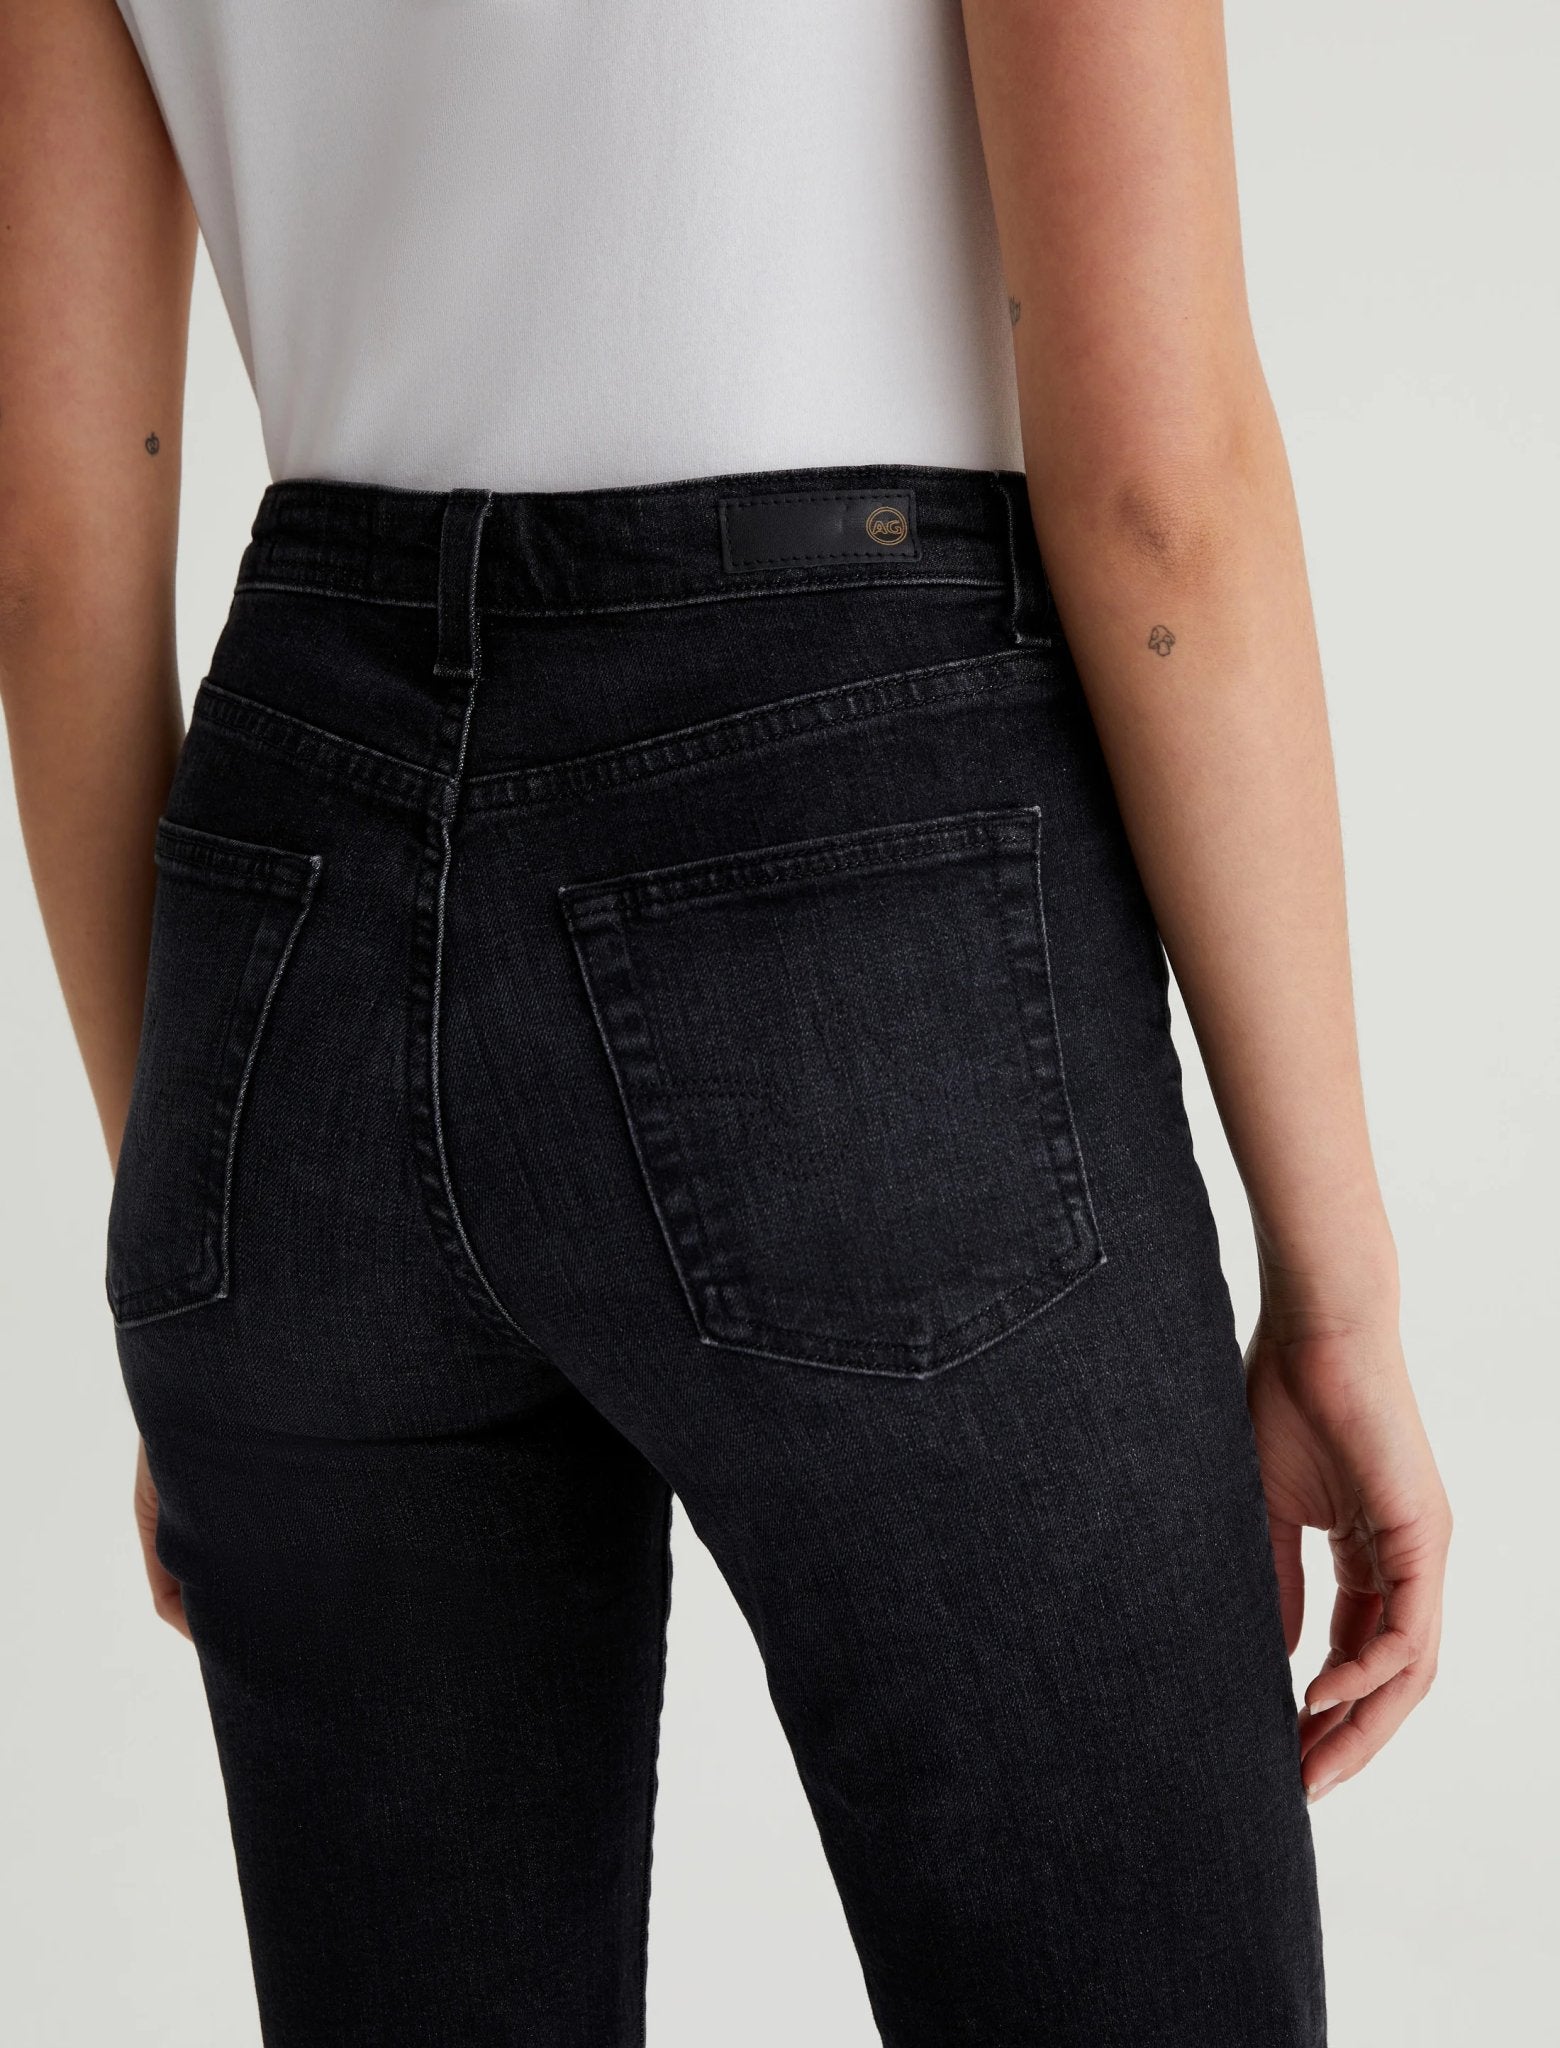 Saige High Rise Straight Jeans - AG Jeans - Danali - STS1A99-COSM-26